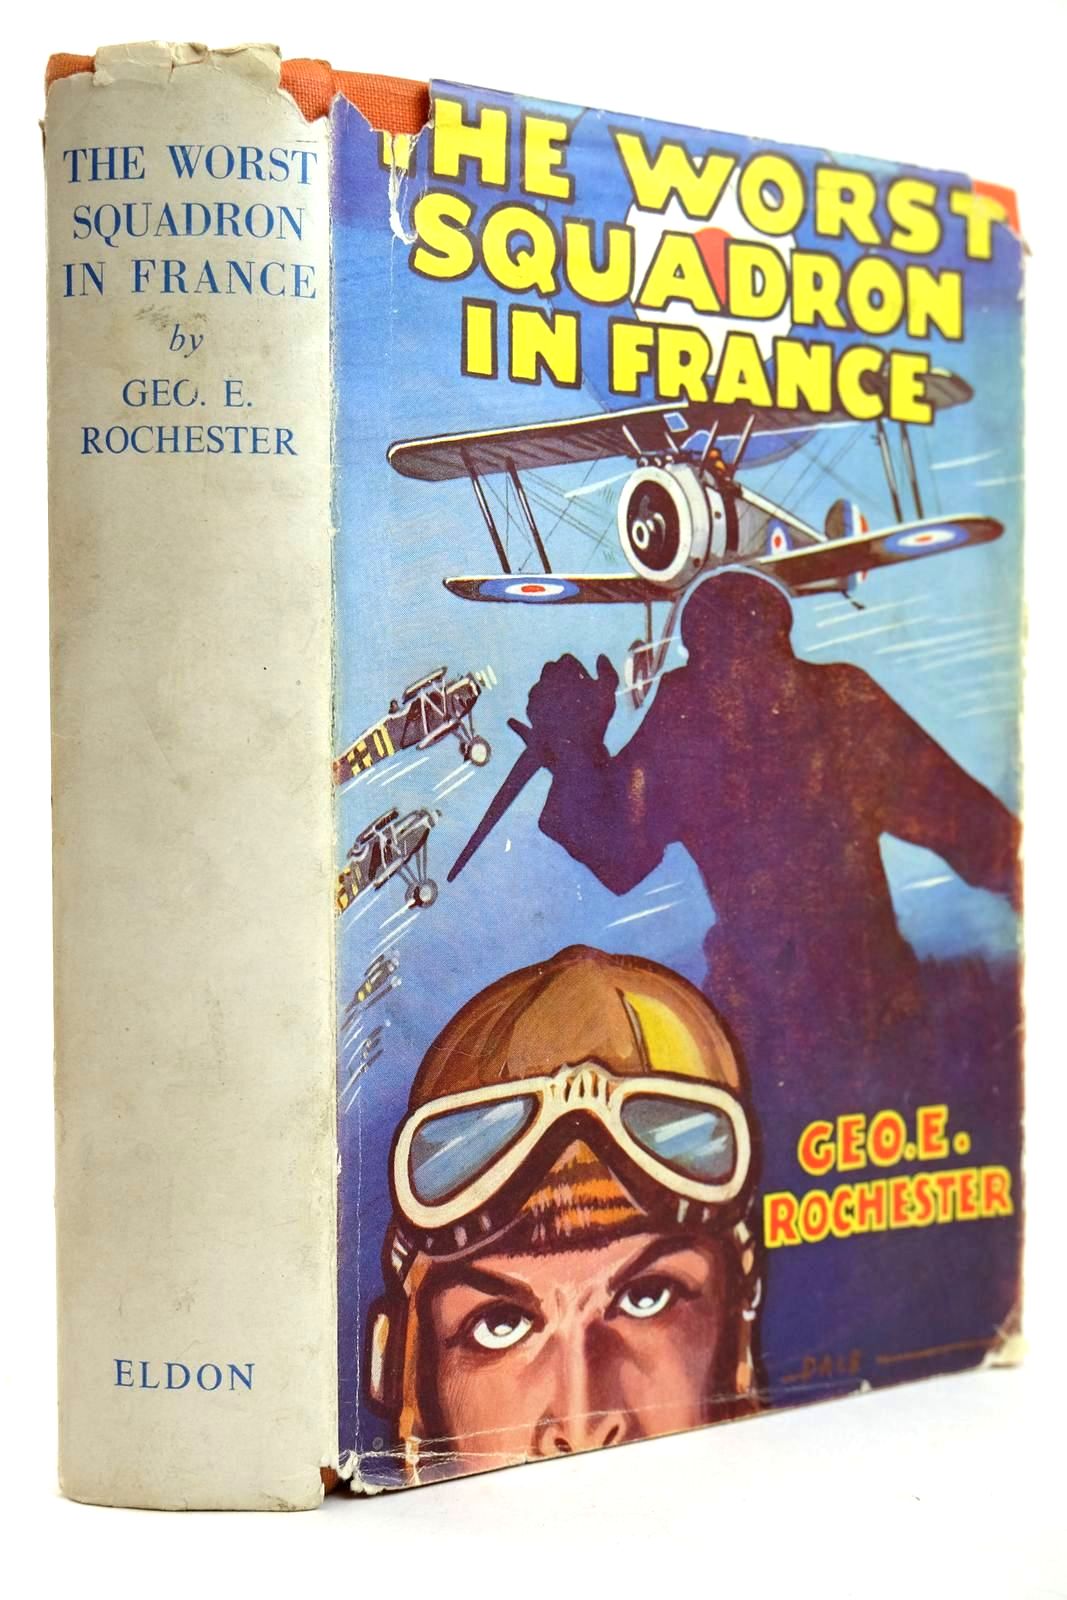 Photo of THE WORST SQUADRON IN FRANCE written by Rochester, George E. published by Eldon Press Ltd. (STOCK CODE: 2132013)  for sale by Stella & Rose's Books